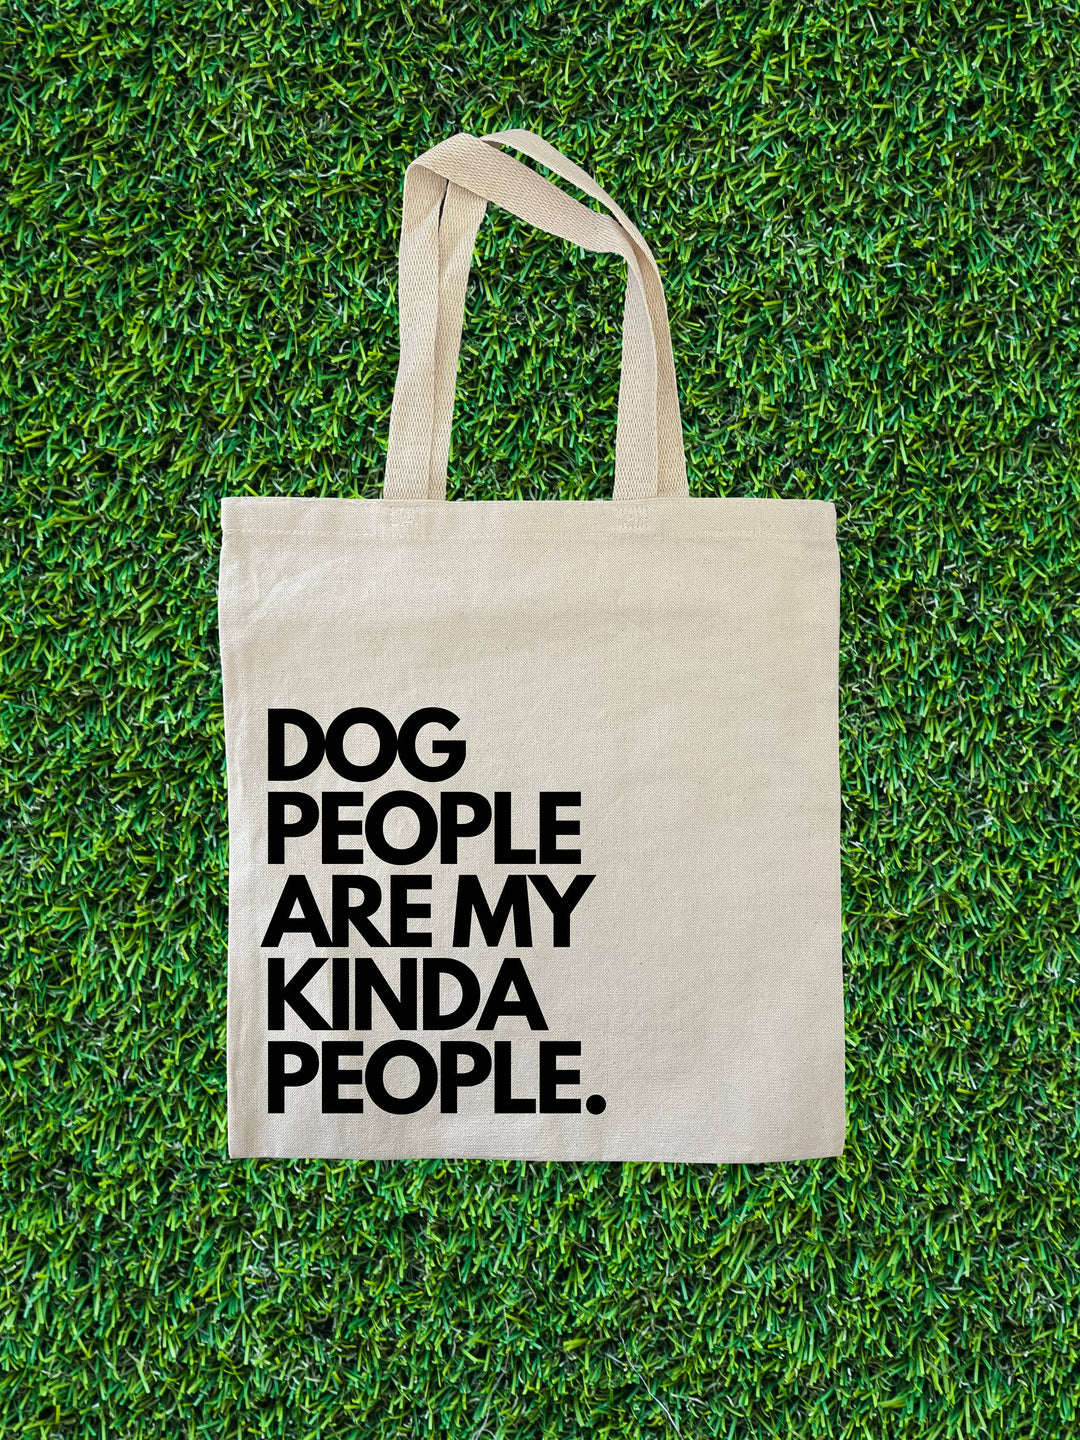 Dog People Are My Kind of People Tote Bag